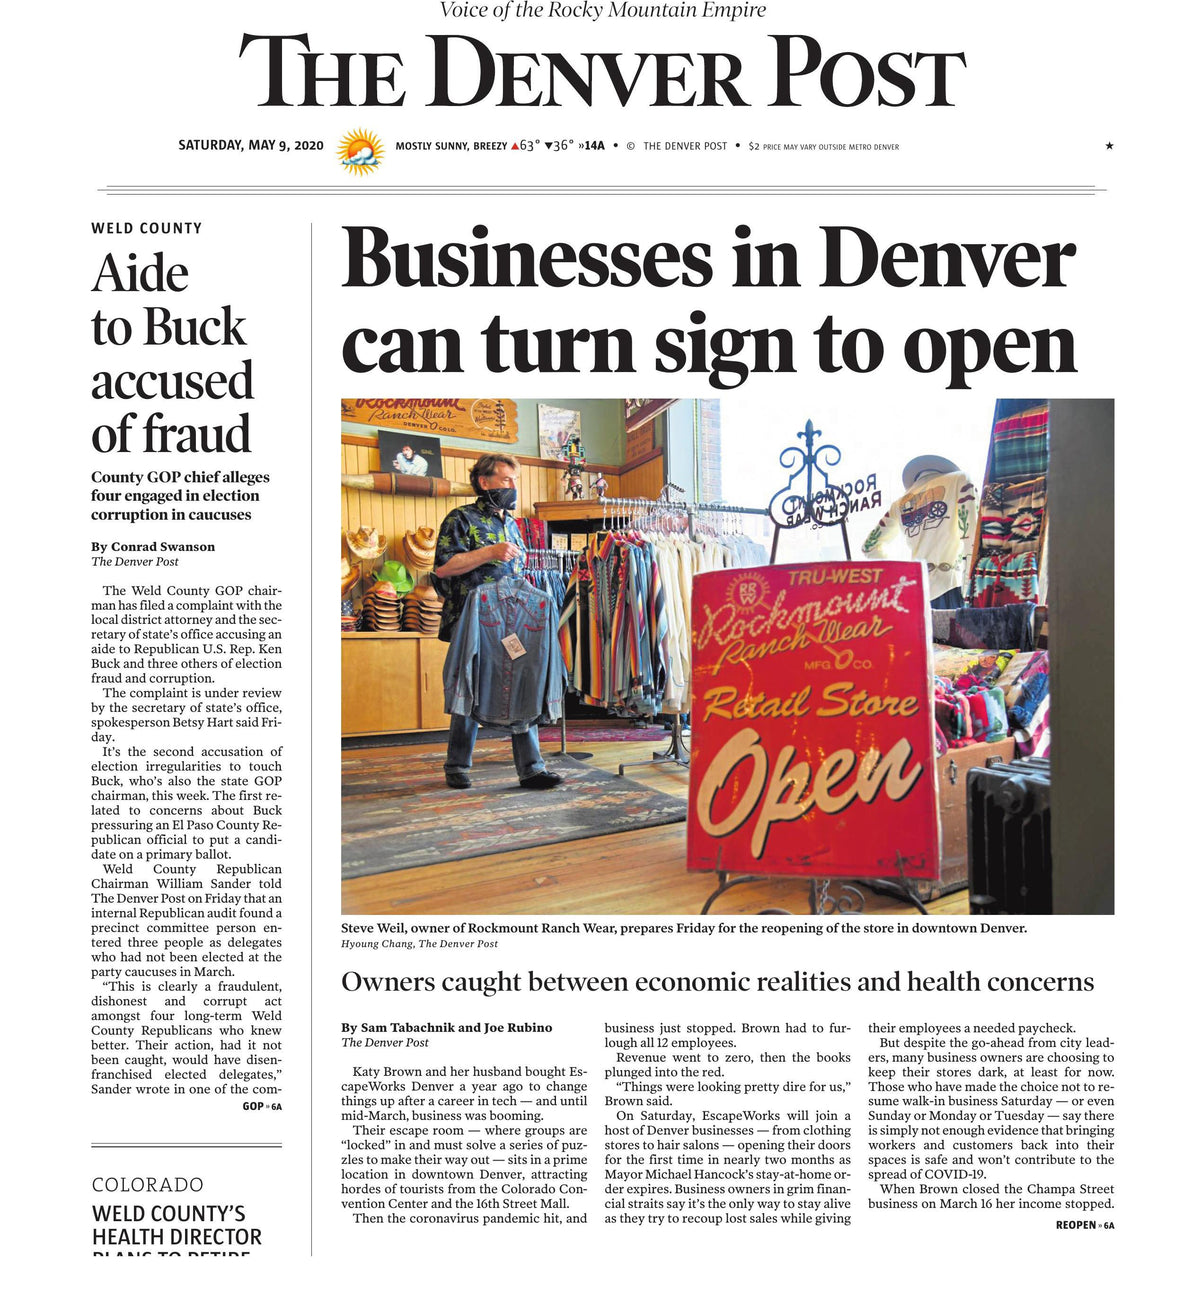 Rockmount on Cover of The Denver Post - Denver Businesses Can Turn Signs to Open